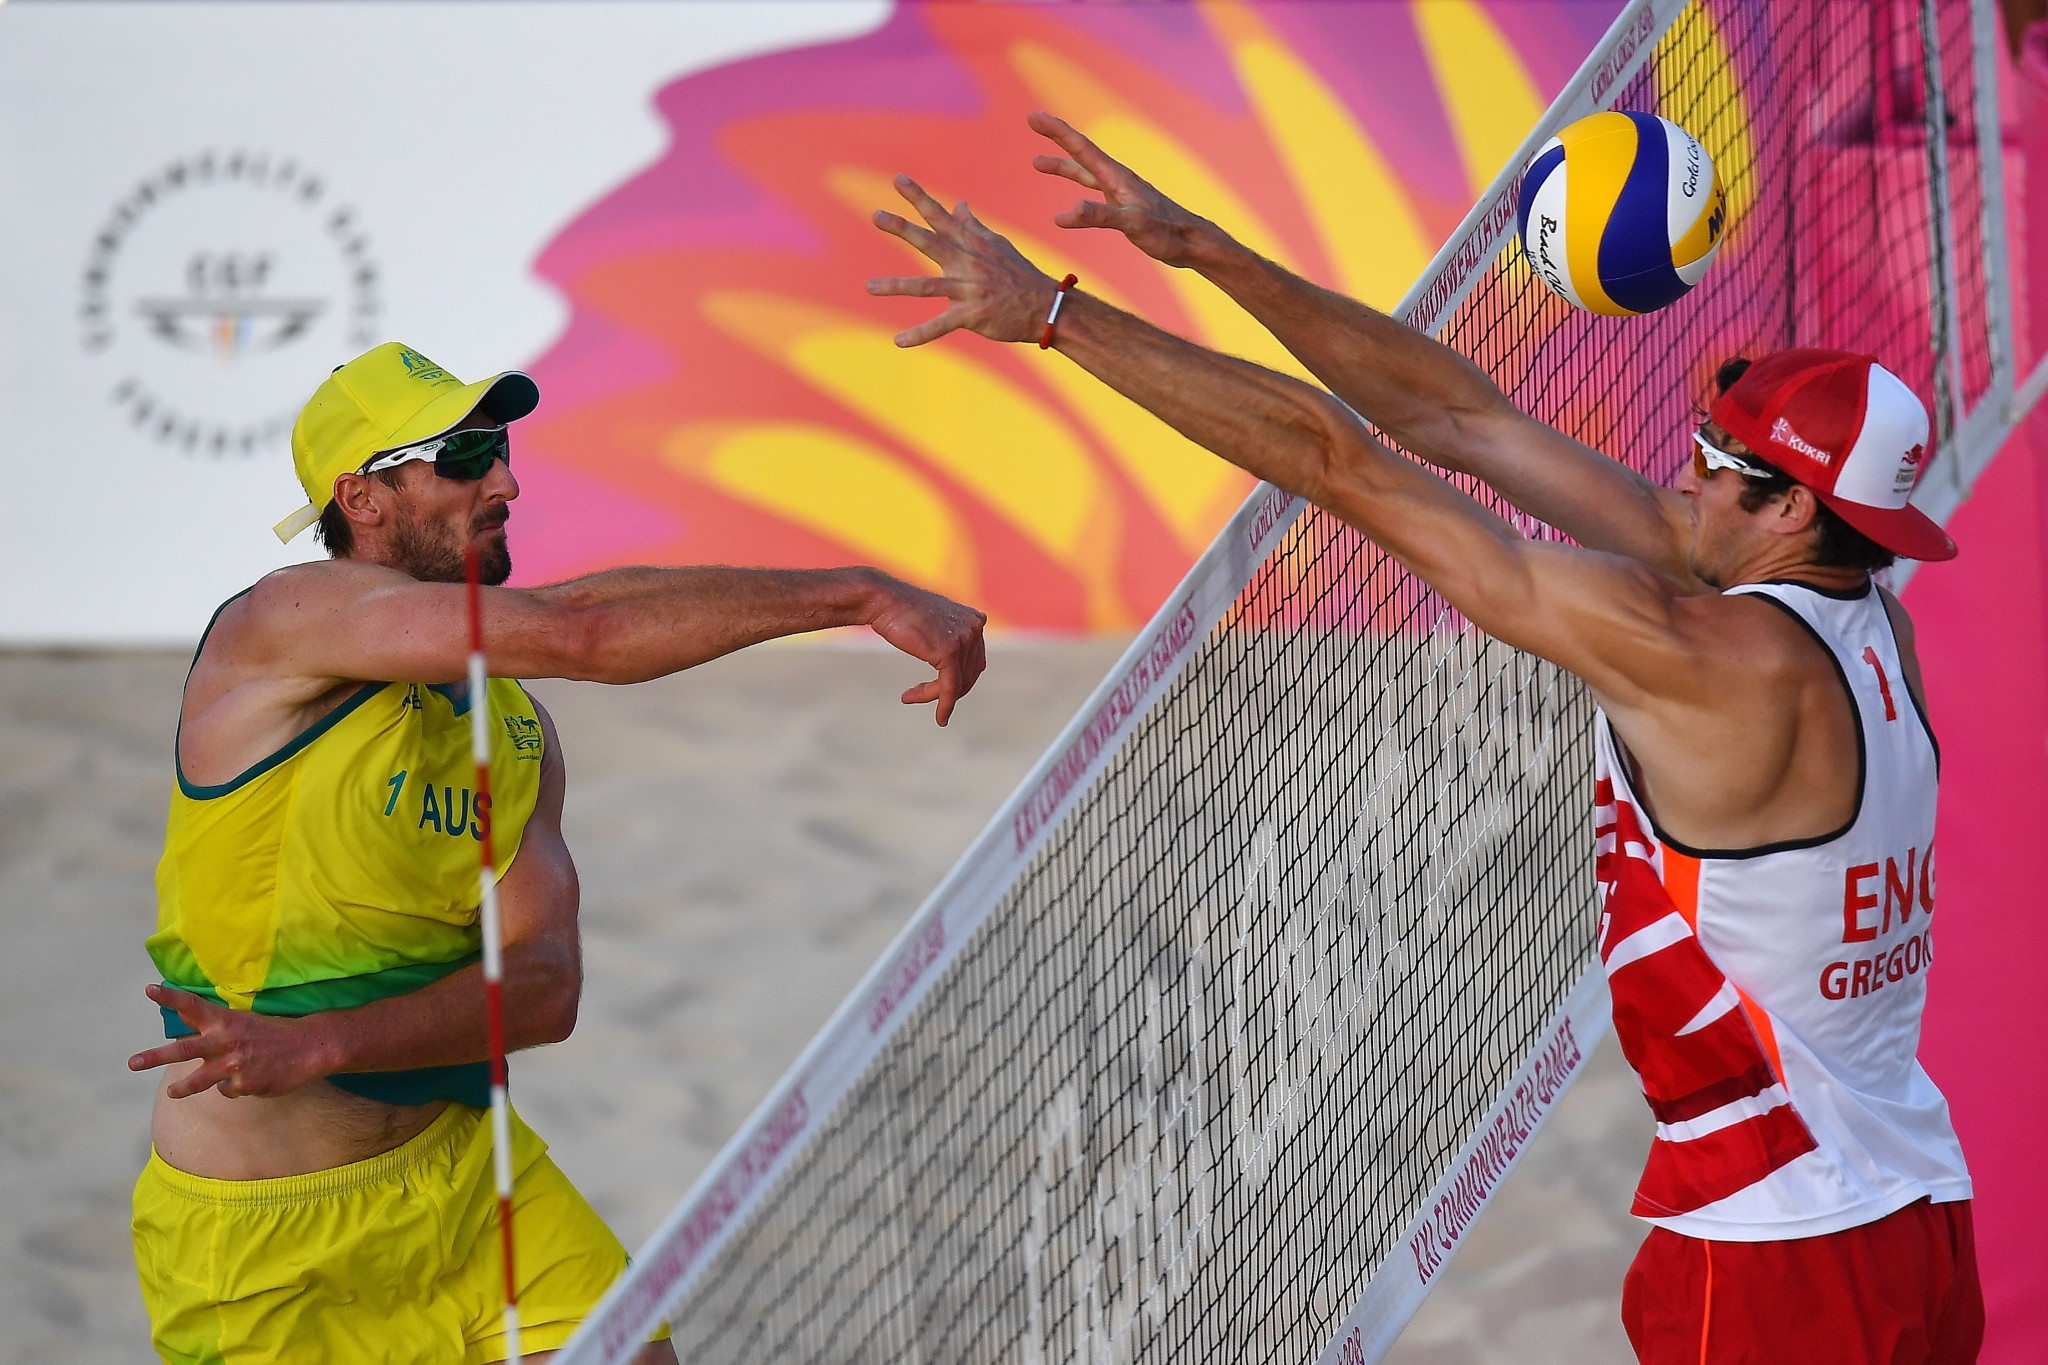 Chris McHugh, left, will team up with new partner Paul Burnett at Birmingham 2022 as she seeks to add another gold medal after winning at Gold Coast 2018 when beach volleyball made its Commonwealth Games debut ©Getty Images